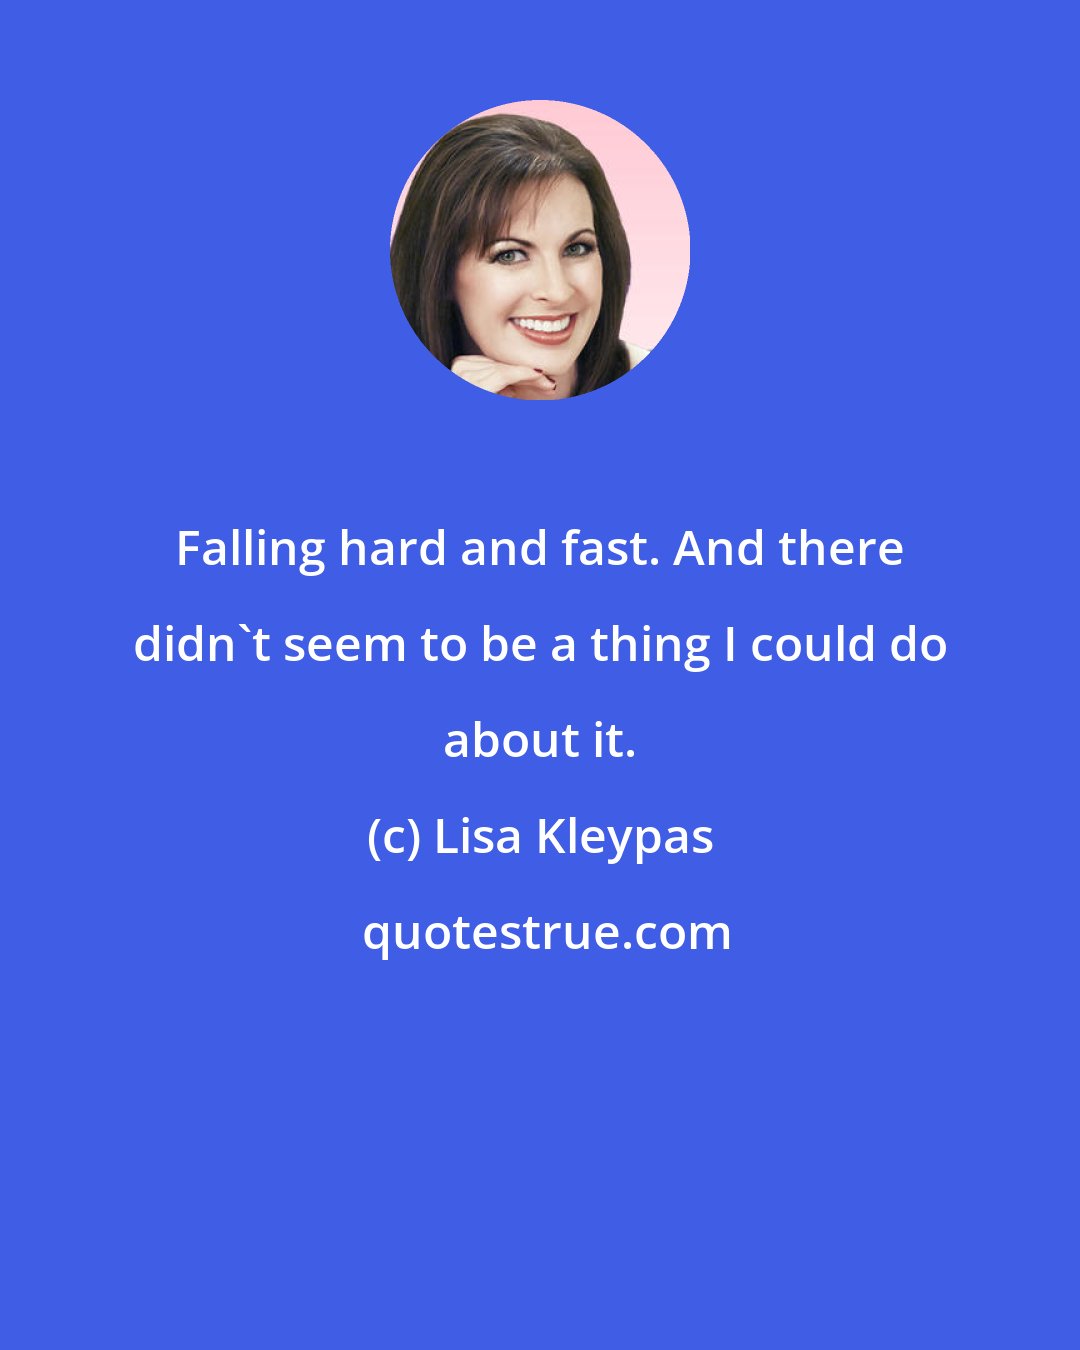 Lisa Kleypas: Falling hard and fast. And there didn't seem to be a thing I could do about it.